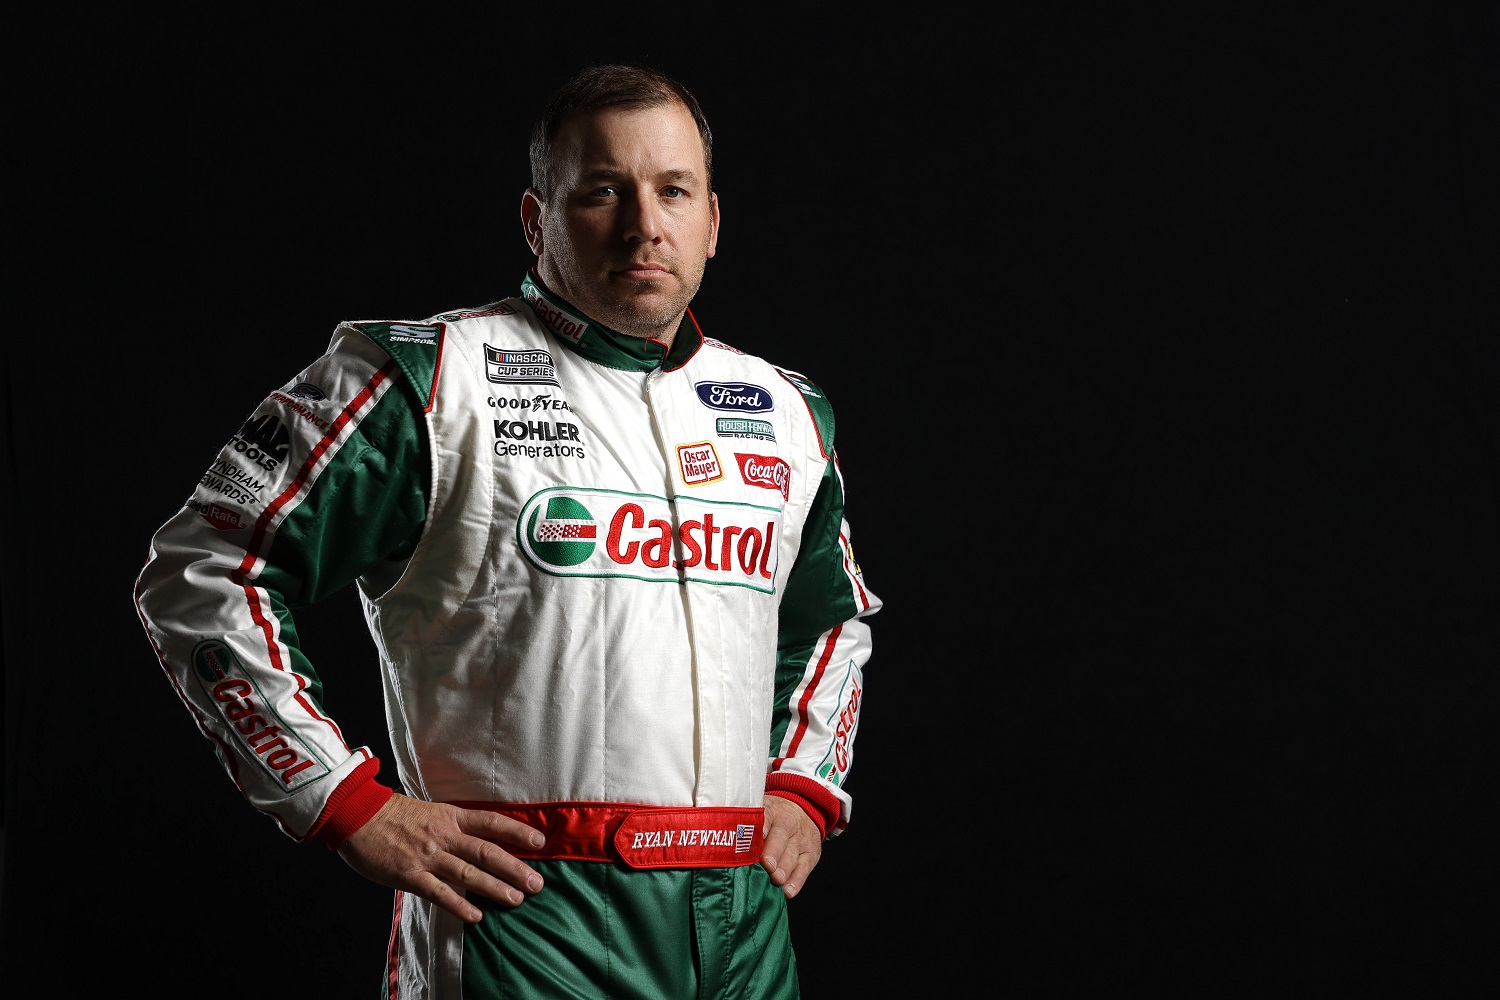 NASCAR driver Ryan Newman poses for a photo during the 2021 NASCAR Production Days at Fox Sports Studios.